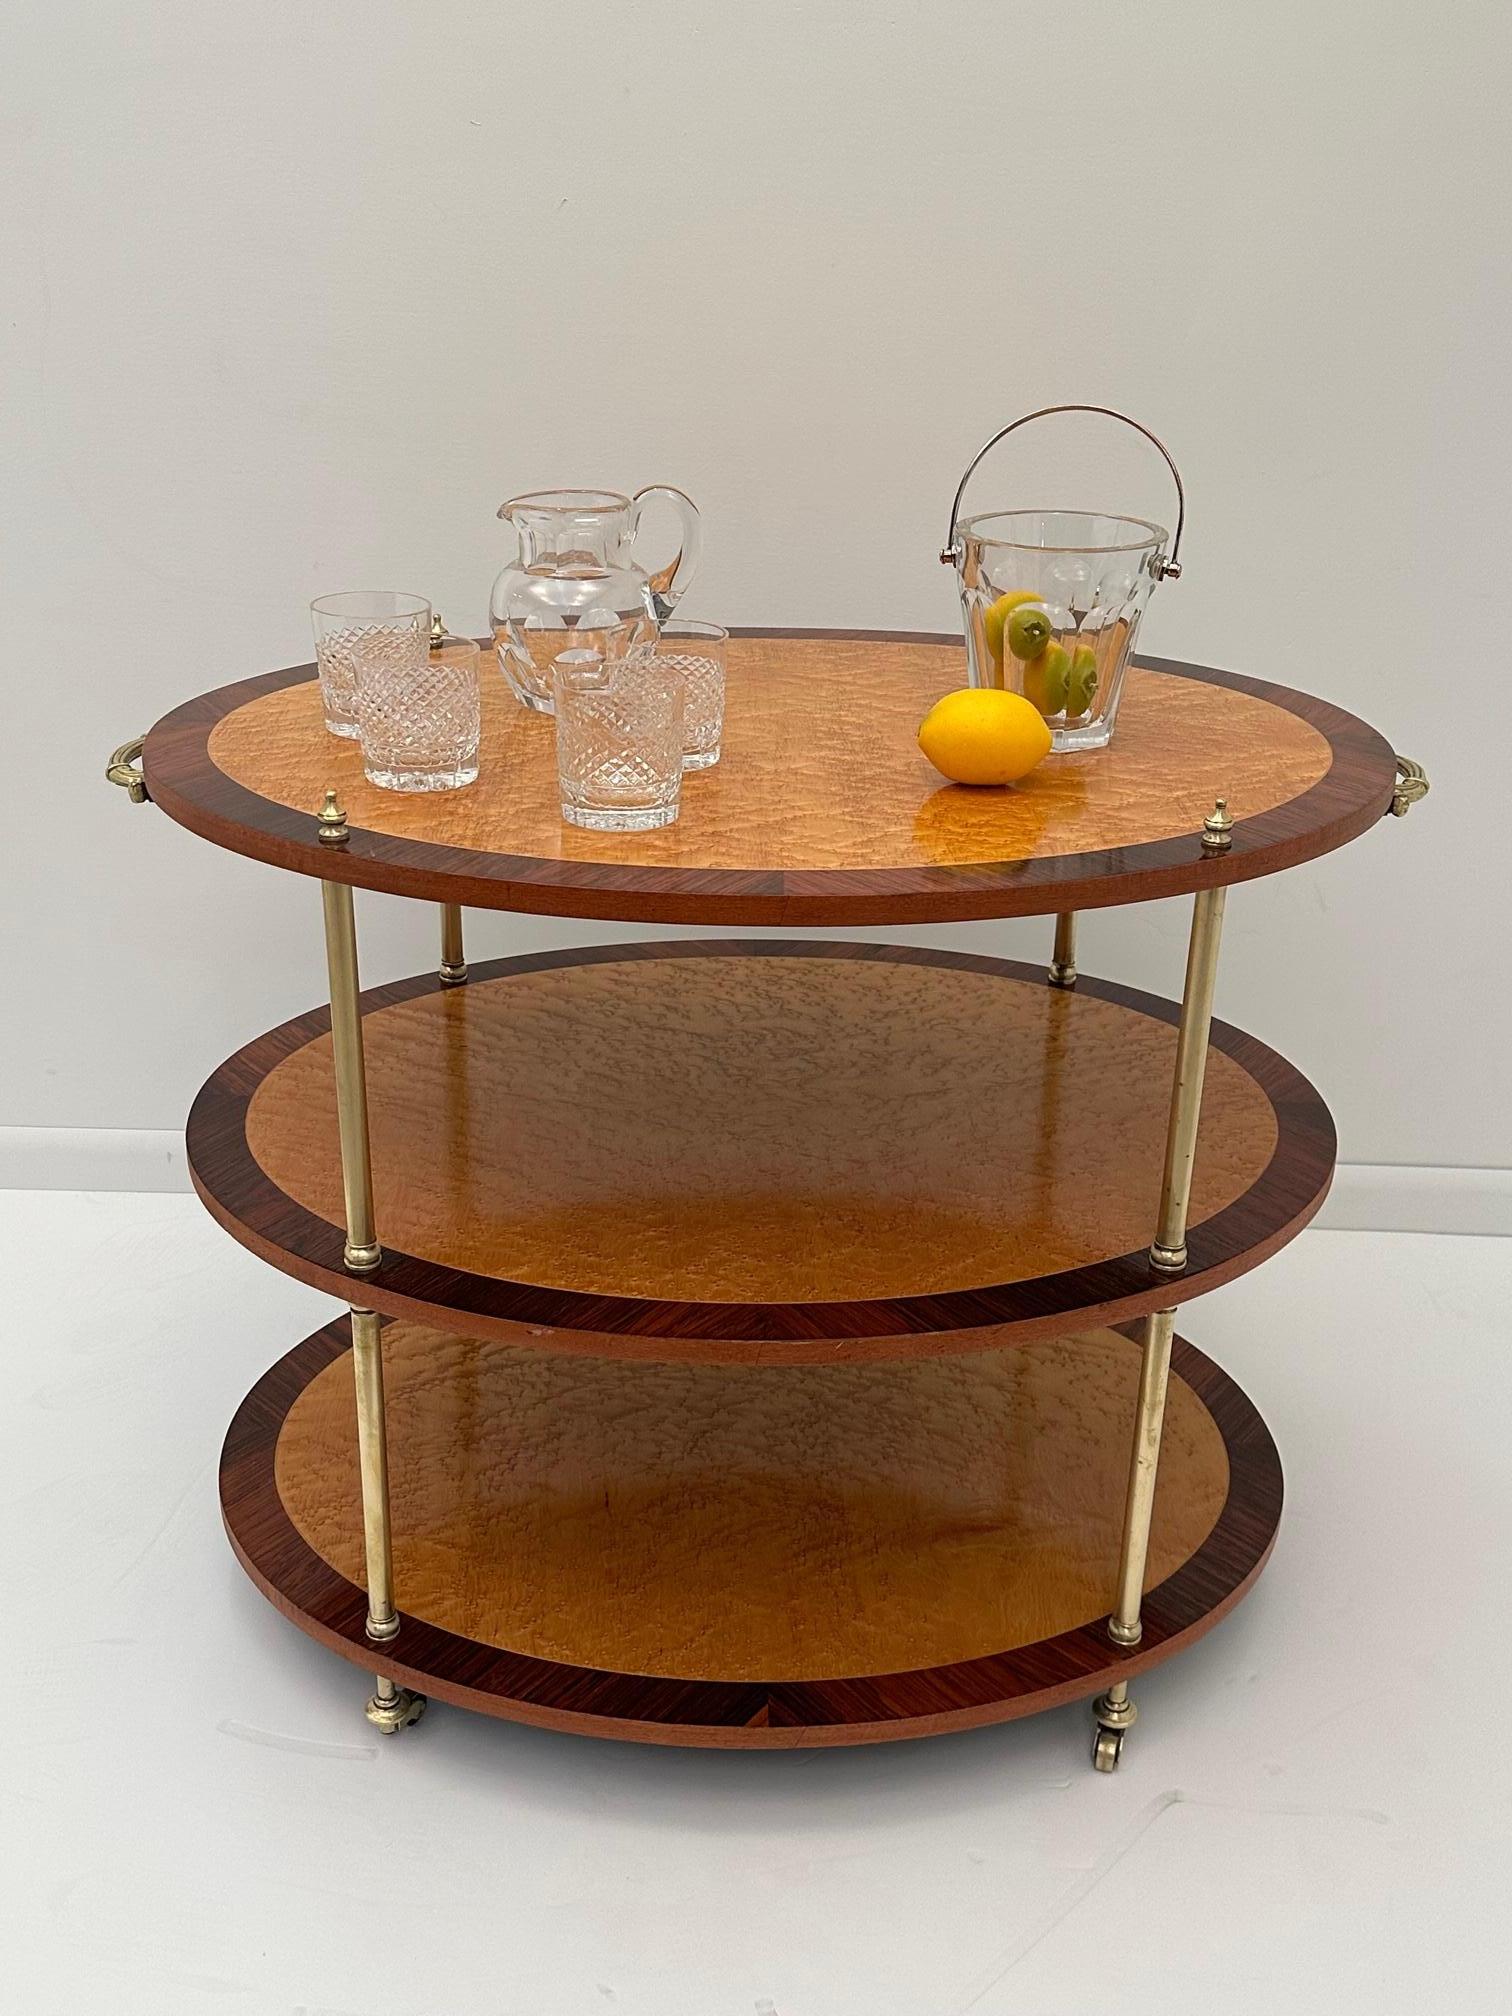 Superb vintage 3 tier serving cart having a glamorous combination of oval honey colored burl surfaces with contrasting dark mahogany inlay around the peripheries. The rods that hold the cart together are brass, as are the beautiful handles and